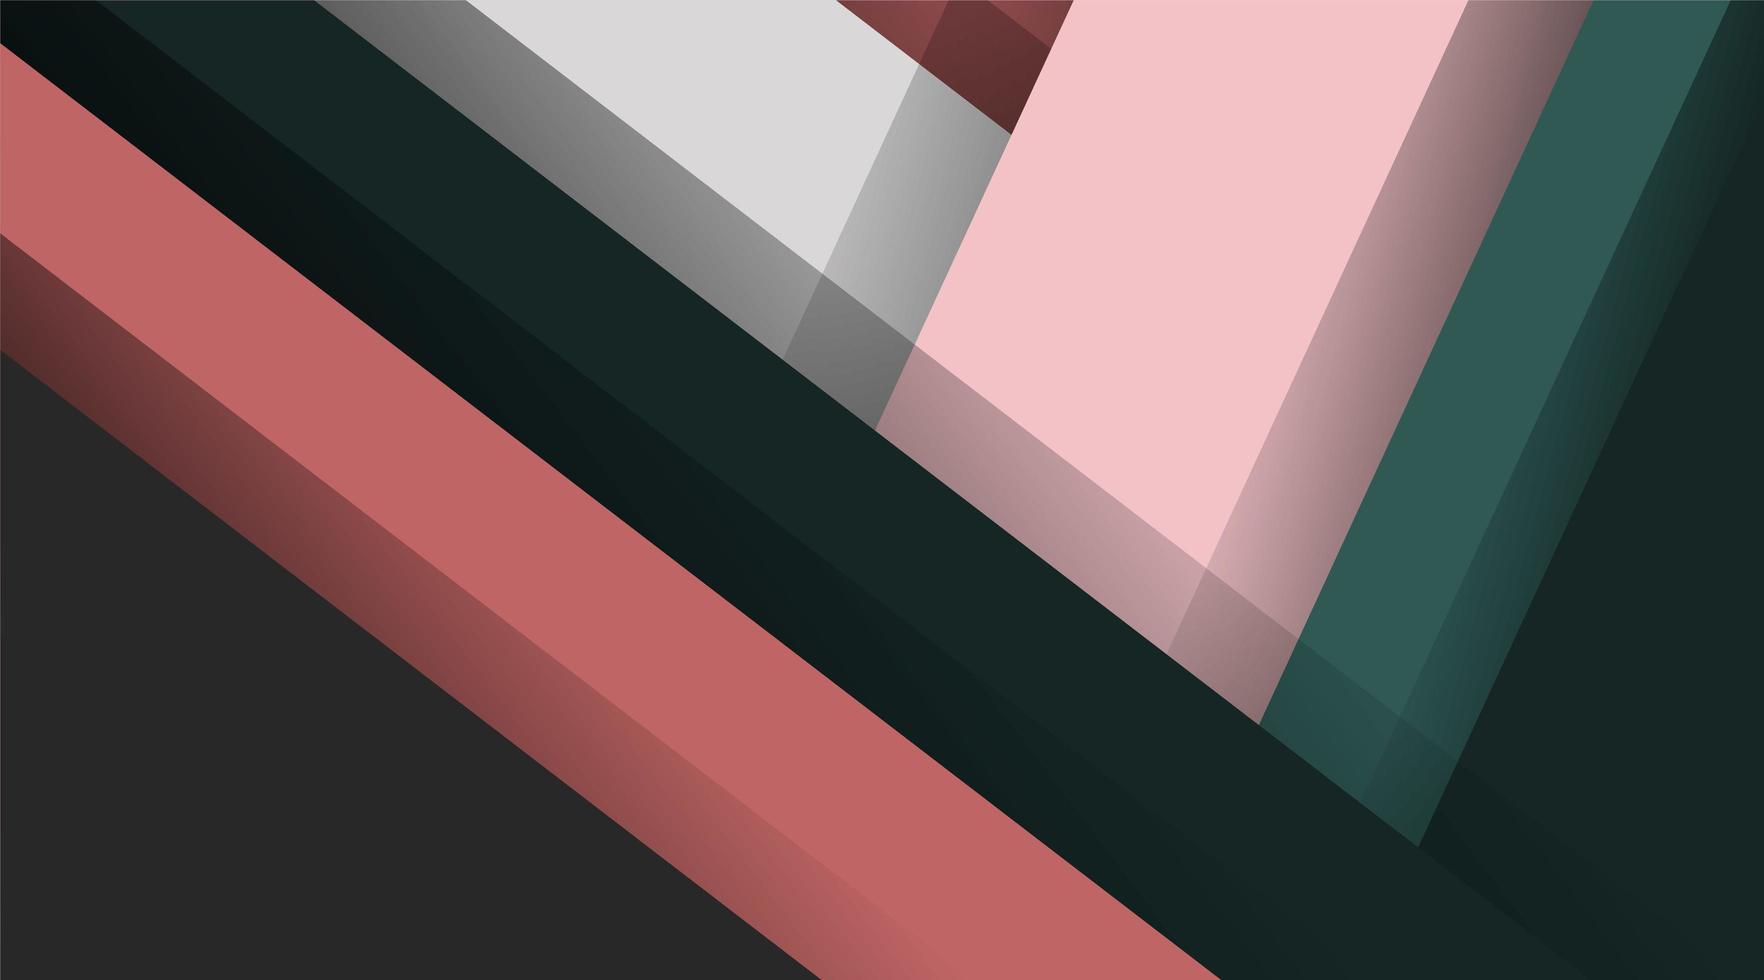 Abstract Vector Modern Material Design Background. overlapping shapes